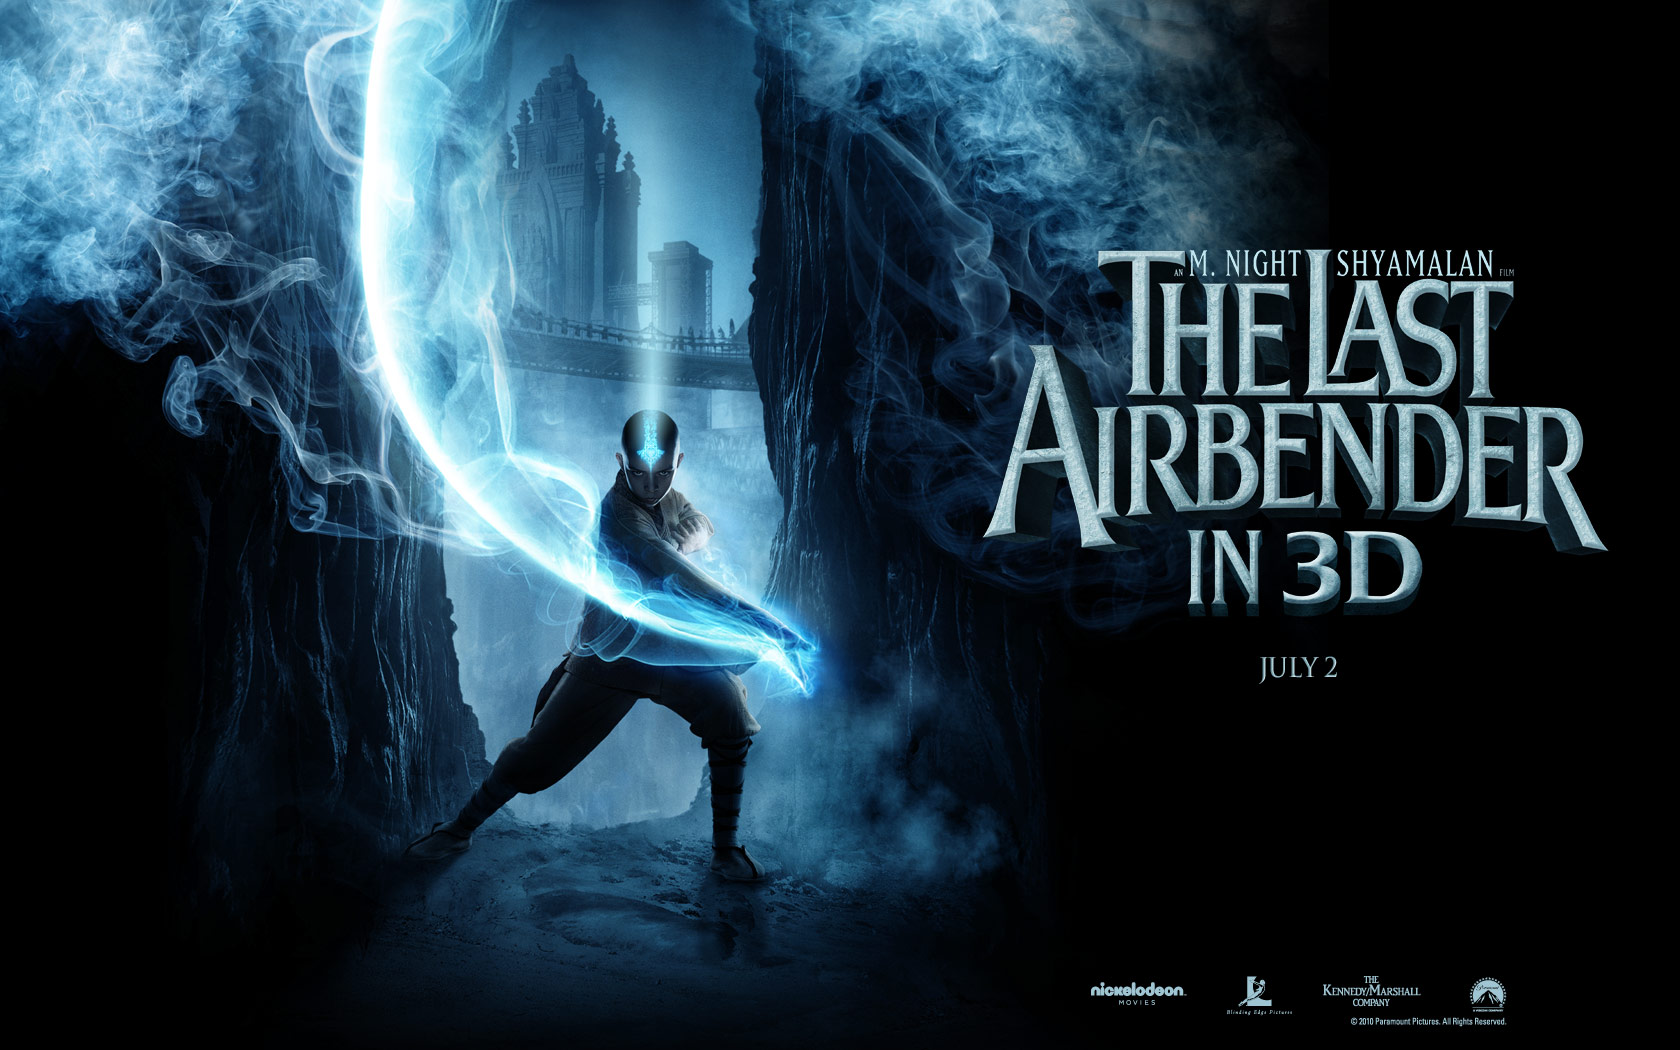  The Last Airbender(ֽ9)